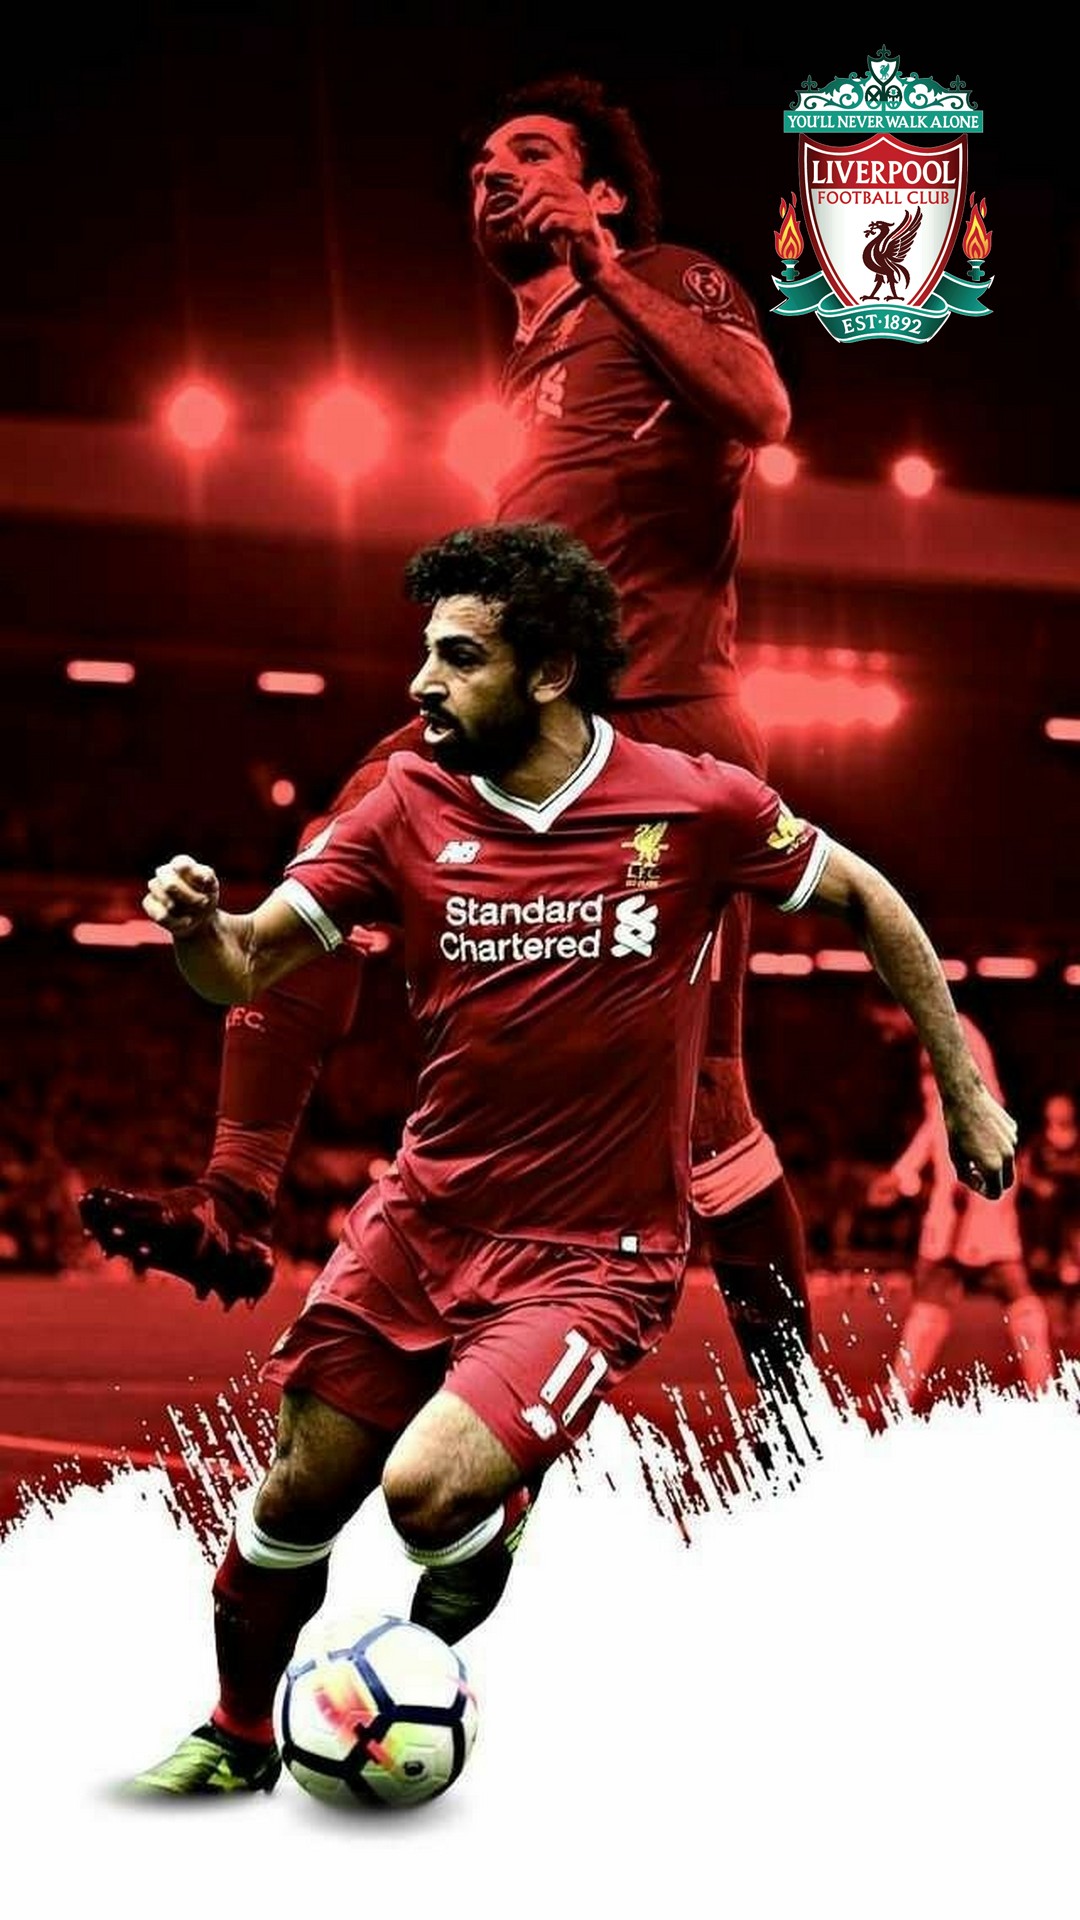 iPhone Wallpaper Mohamed Salah Pictures with image resolution 1080x1920 pixel. You can make this wallpaper for your iPhone 5, 6, 7, 8, X backgrounds, Mobile Screensaver, or iPad Lock Screen